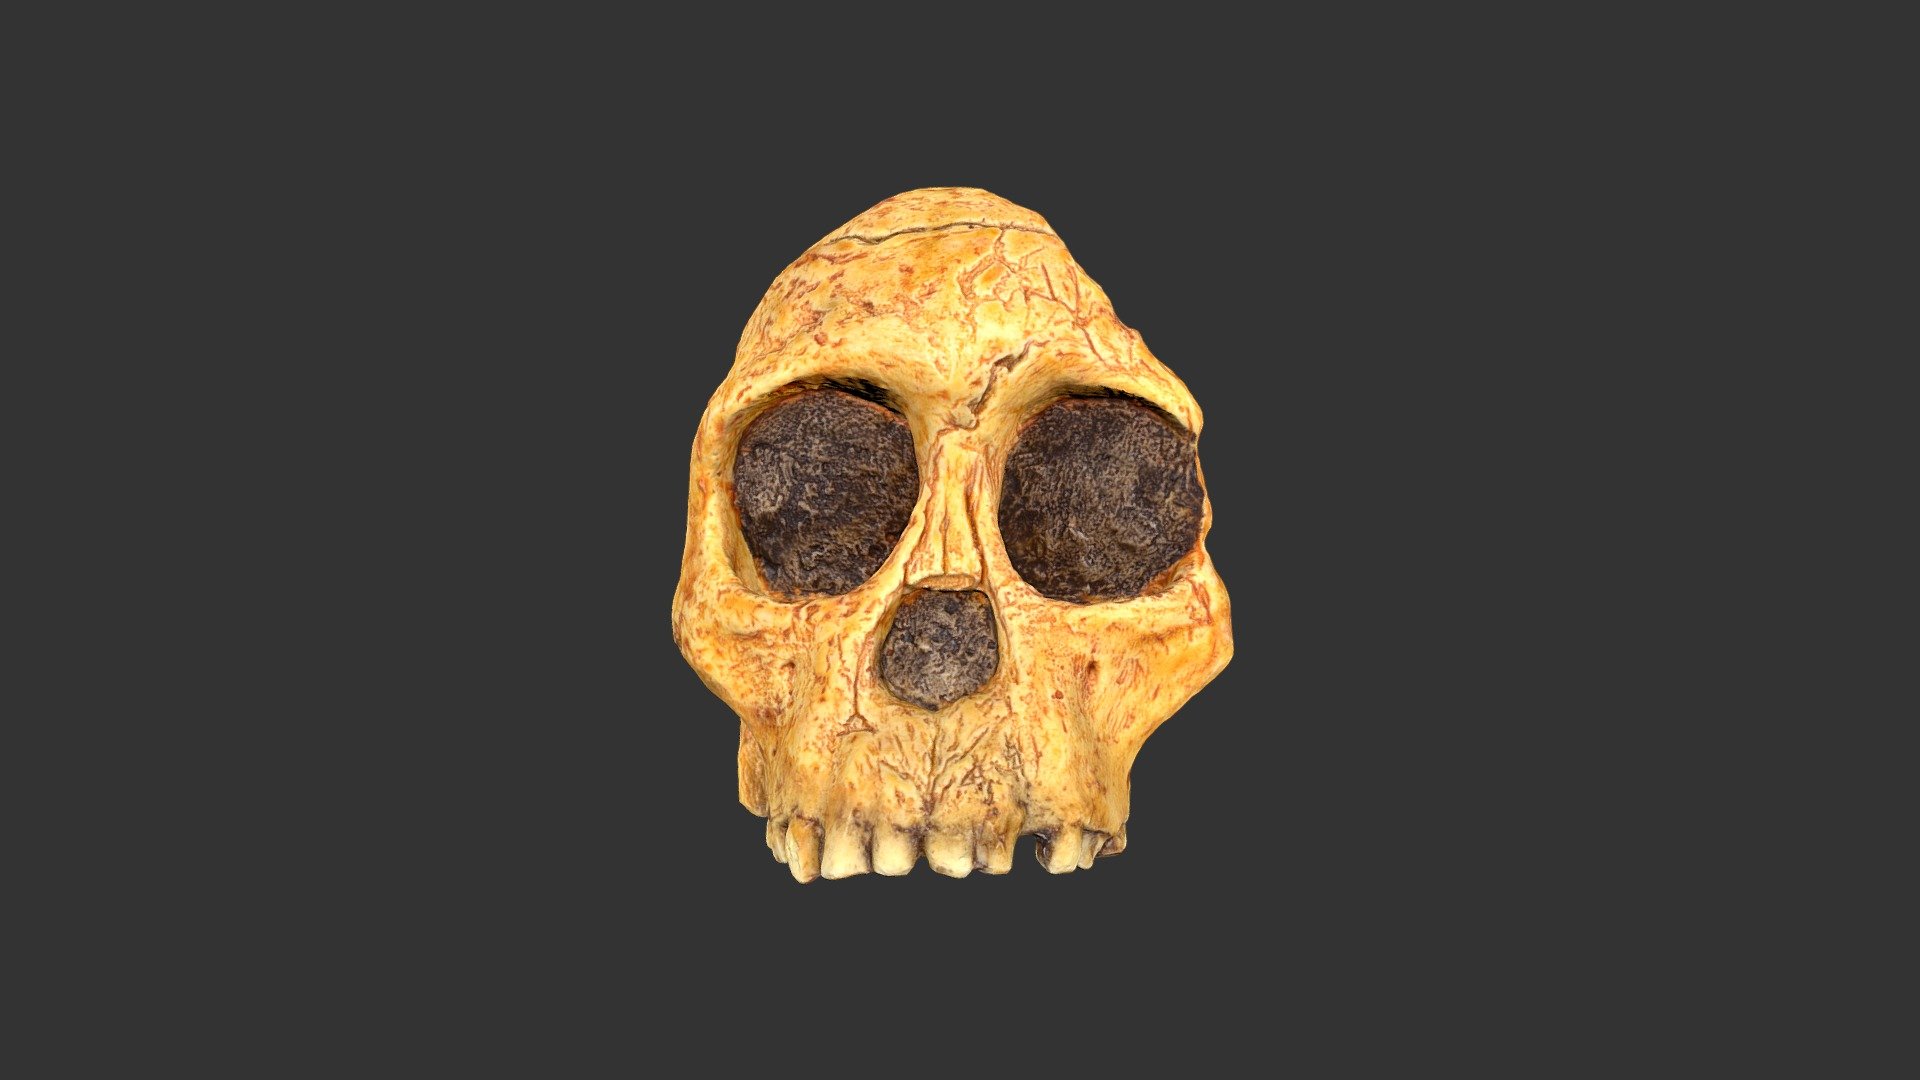 Australopithecus africanus 

Location: Taung, South Africa. 

Age: 2.5 million years ago. 

Material: epoxy resin cast.

Dimensions: length, 67 mm; width, 79 mm; height, 87 mm.

Notes: RLA catalog no. 2501.1rp11-2 (cast).  Fossil discovered in 1924 by Raymond Dart.  Cranial facial bones of juvenile approximately 5 years old at death.  Named Taung 1 or Taung Child.  Cast made by Bone Clones, Inc.  From the teaching collection of the Research Laboratories of Archaeology, University of North Carolina at Chapel Hill.  Model by Aidan Paul 3d model